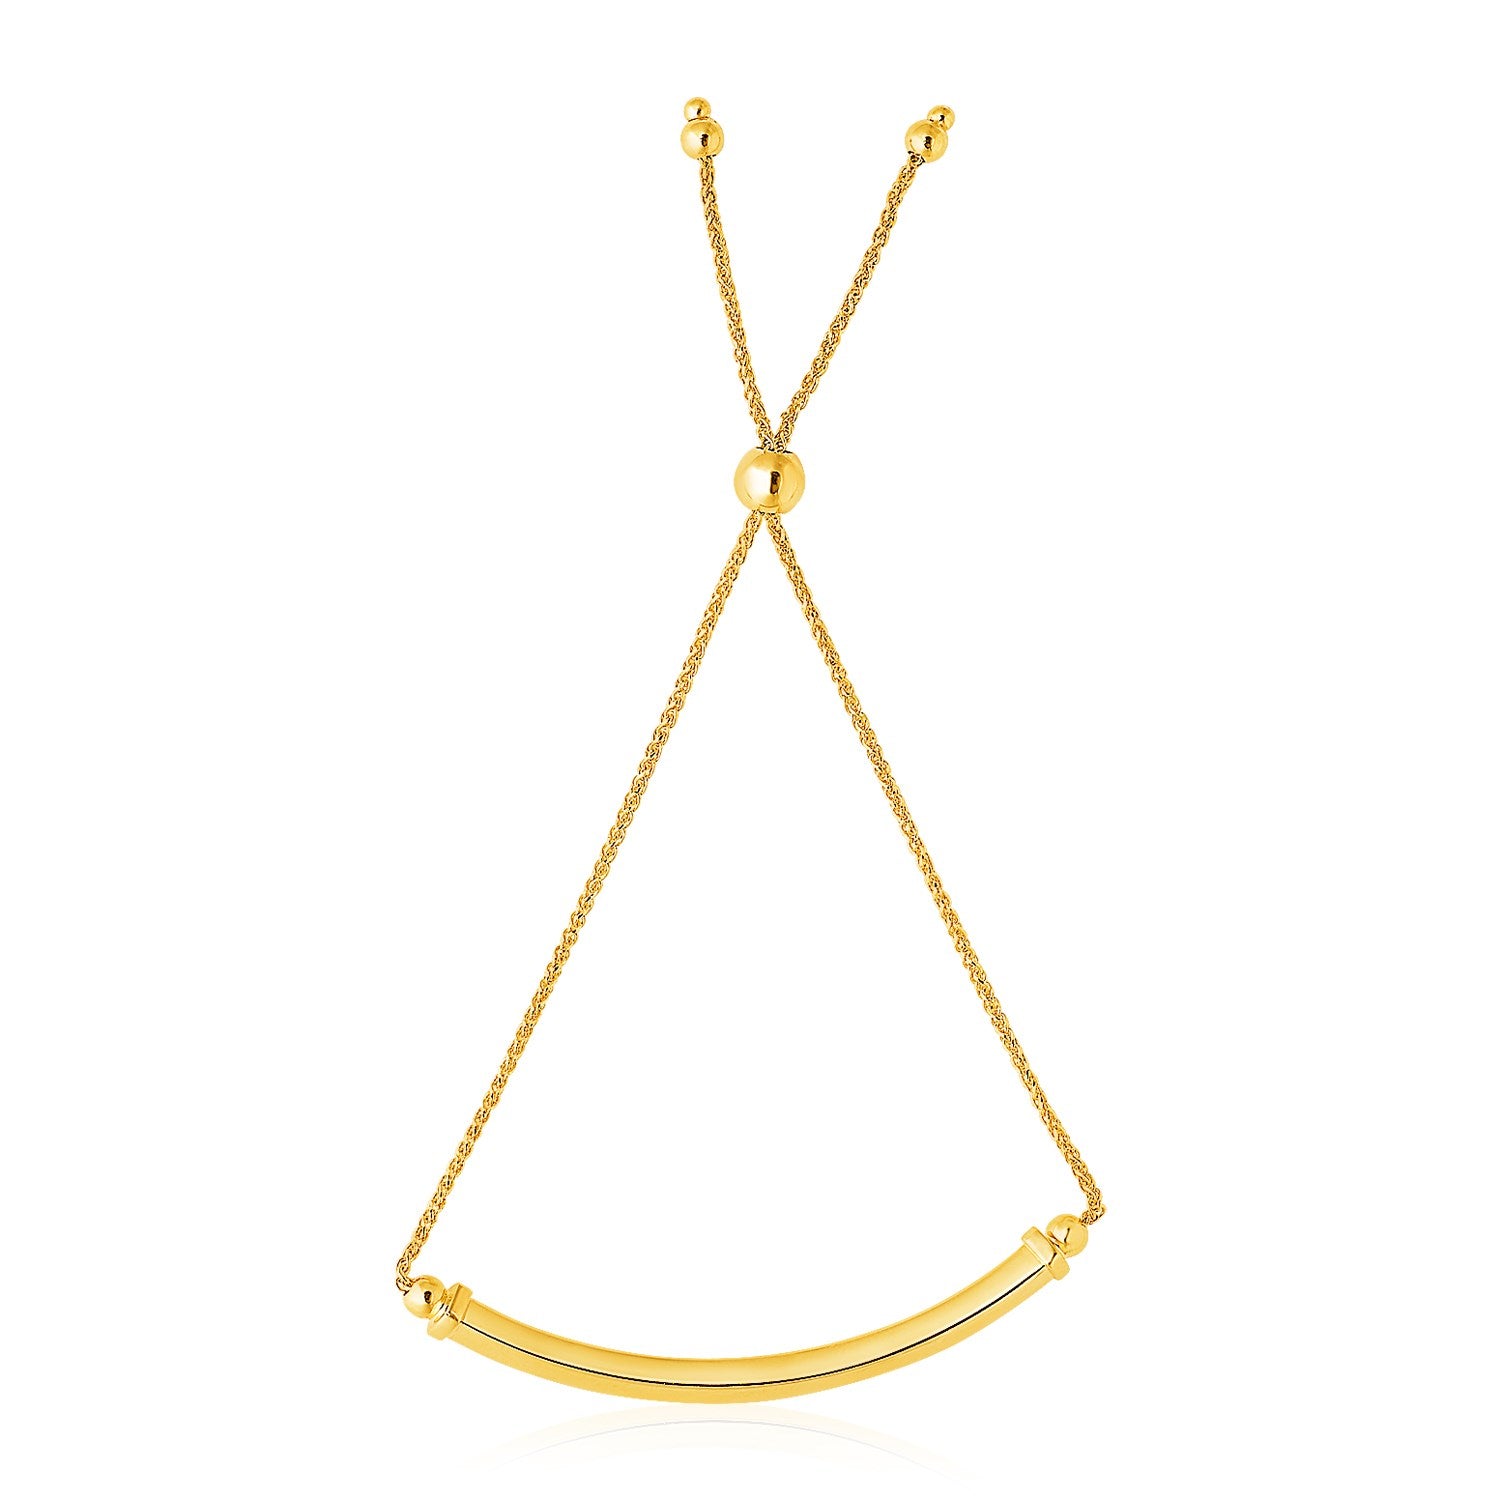 14k Yellow Gold Lariat Bracelet with Polished Curved Bar